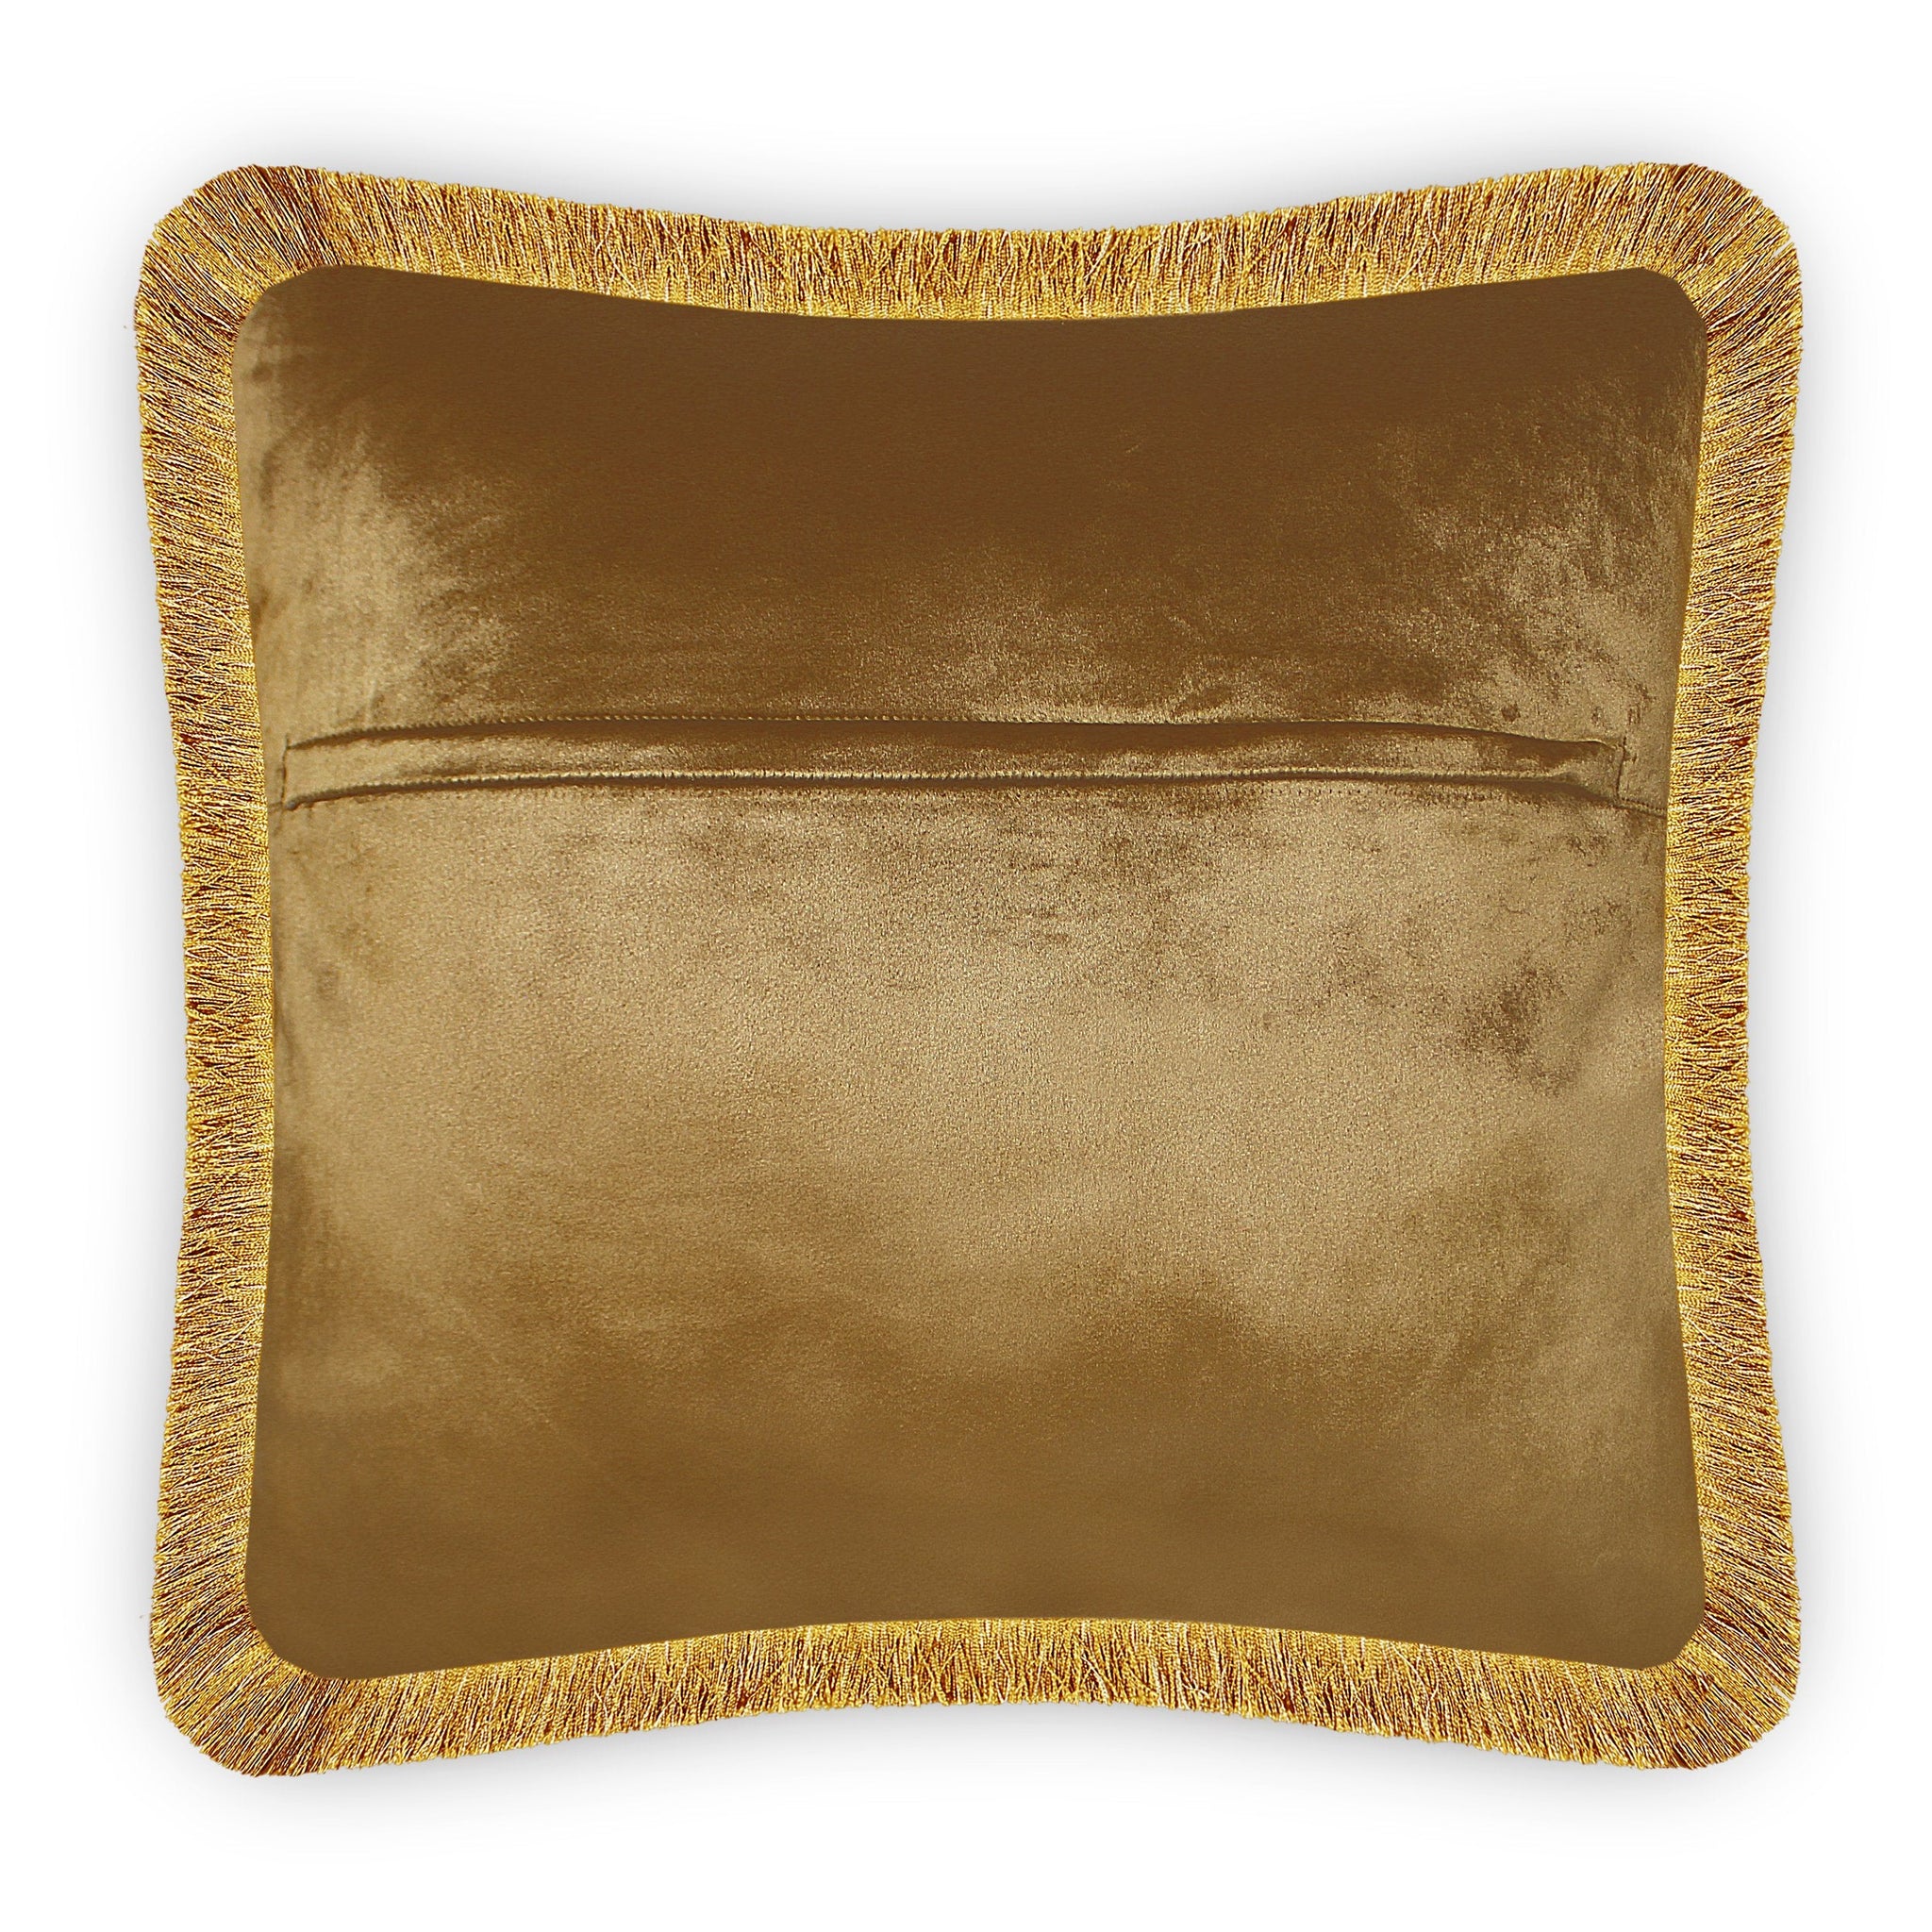 Gold Luxury Classic Horse Embroidery Baroque Style Decorative Cushion Cover Pillow Case Home European Sofa Throw Pillow 